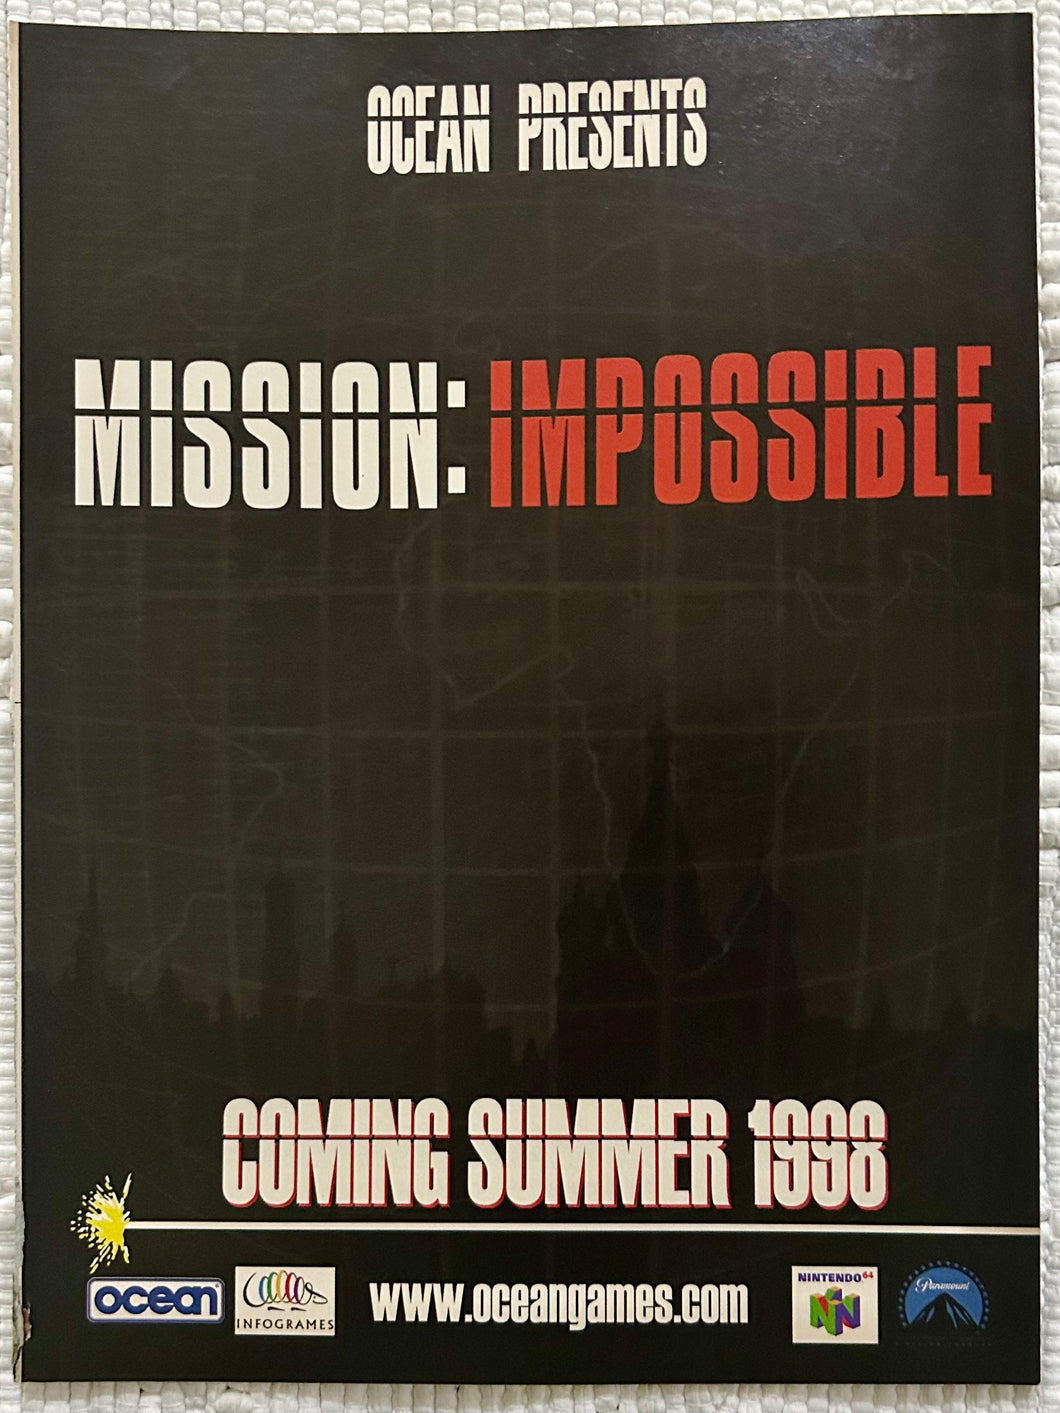 Mission: Impossible - N64 - Original Vintage Advertisement - Print Ads - Laminated A4 Poster